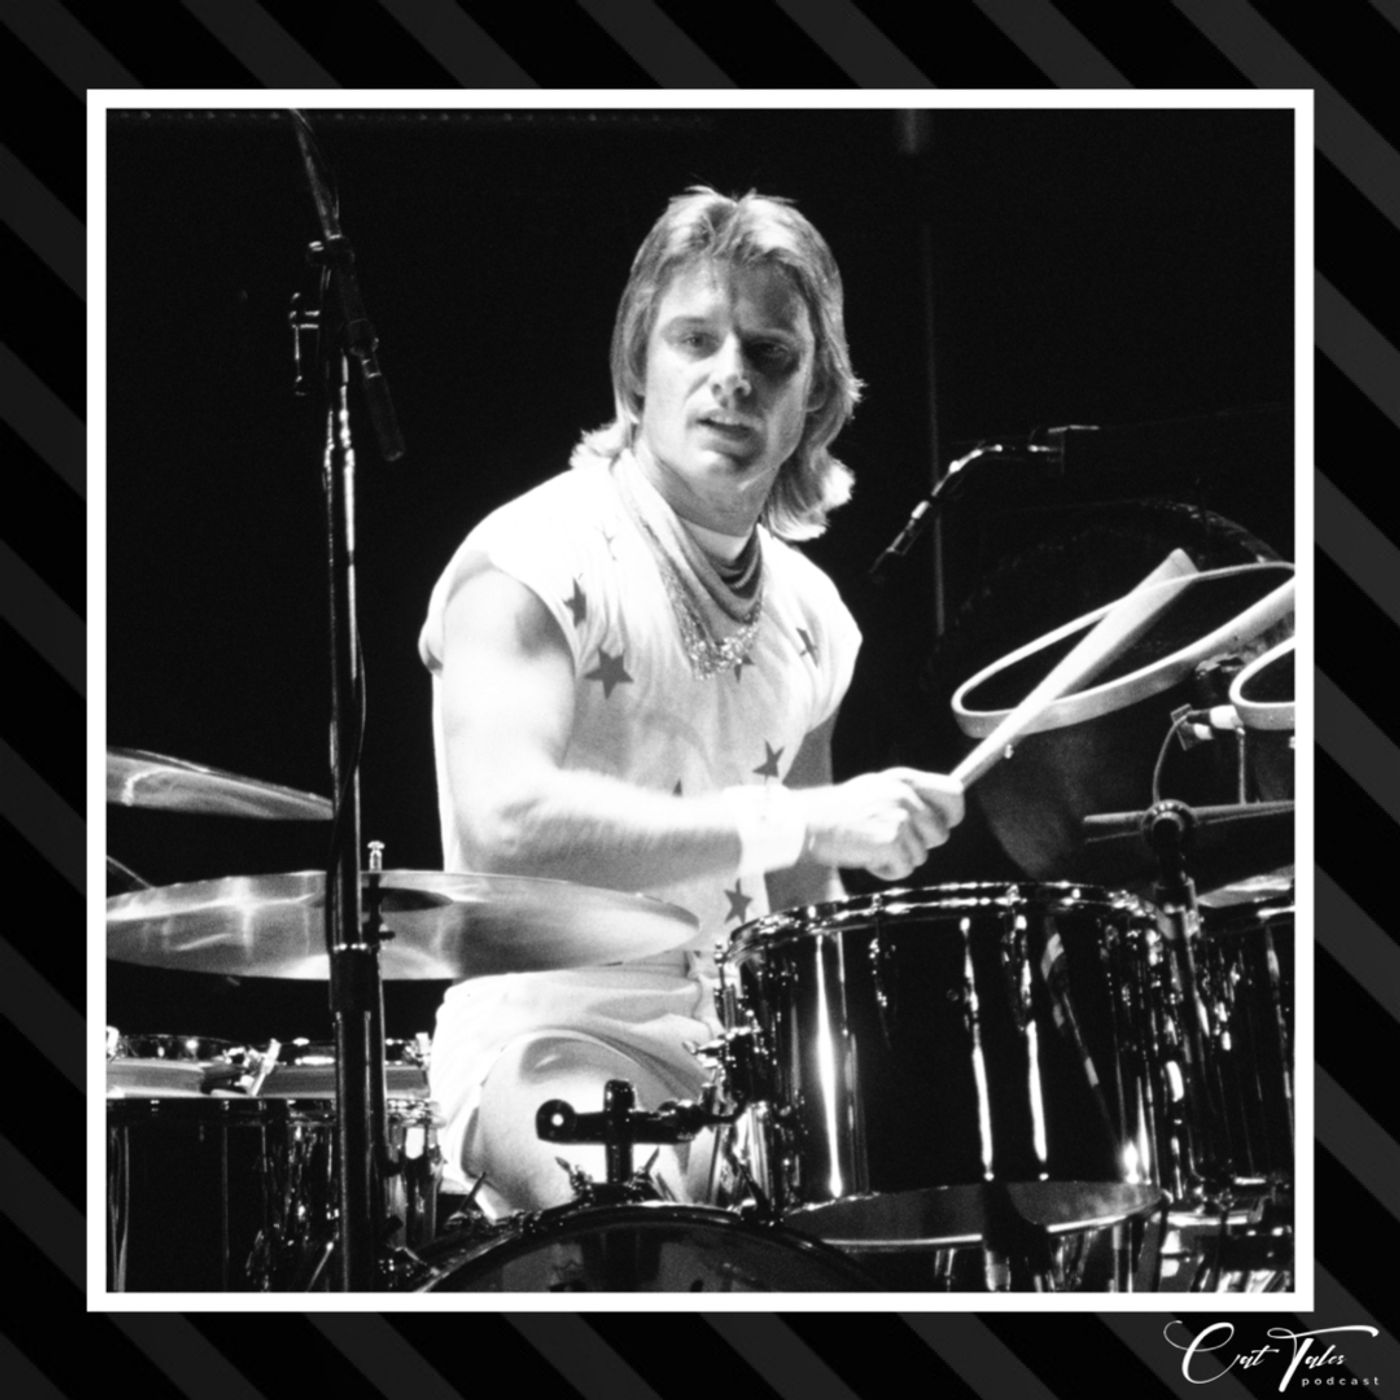 123: The one with Carl Palmer